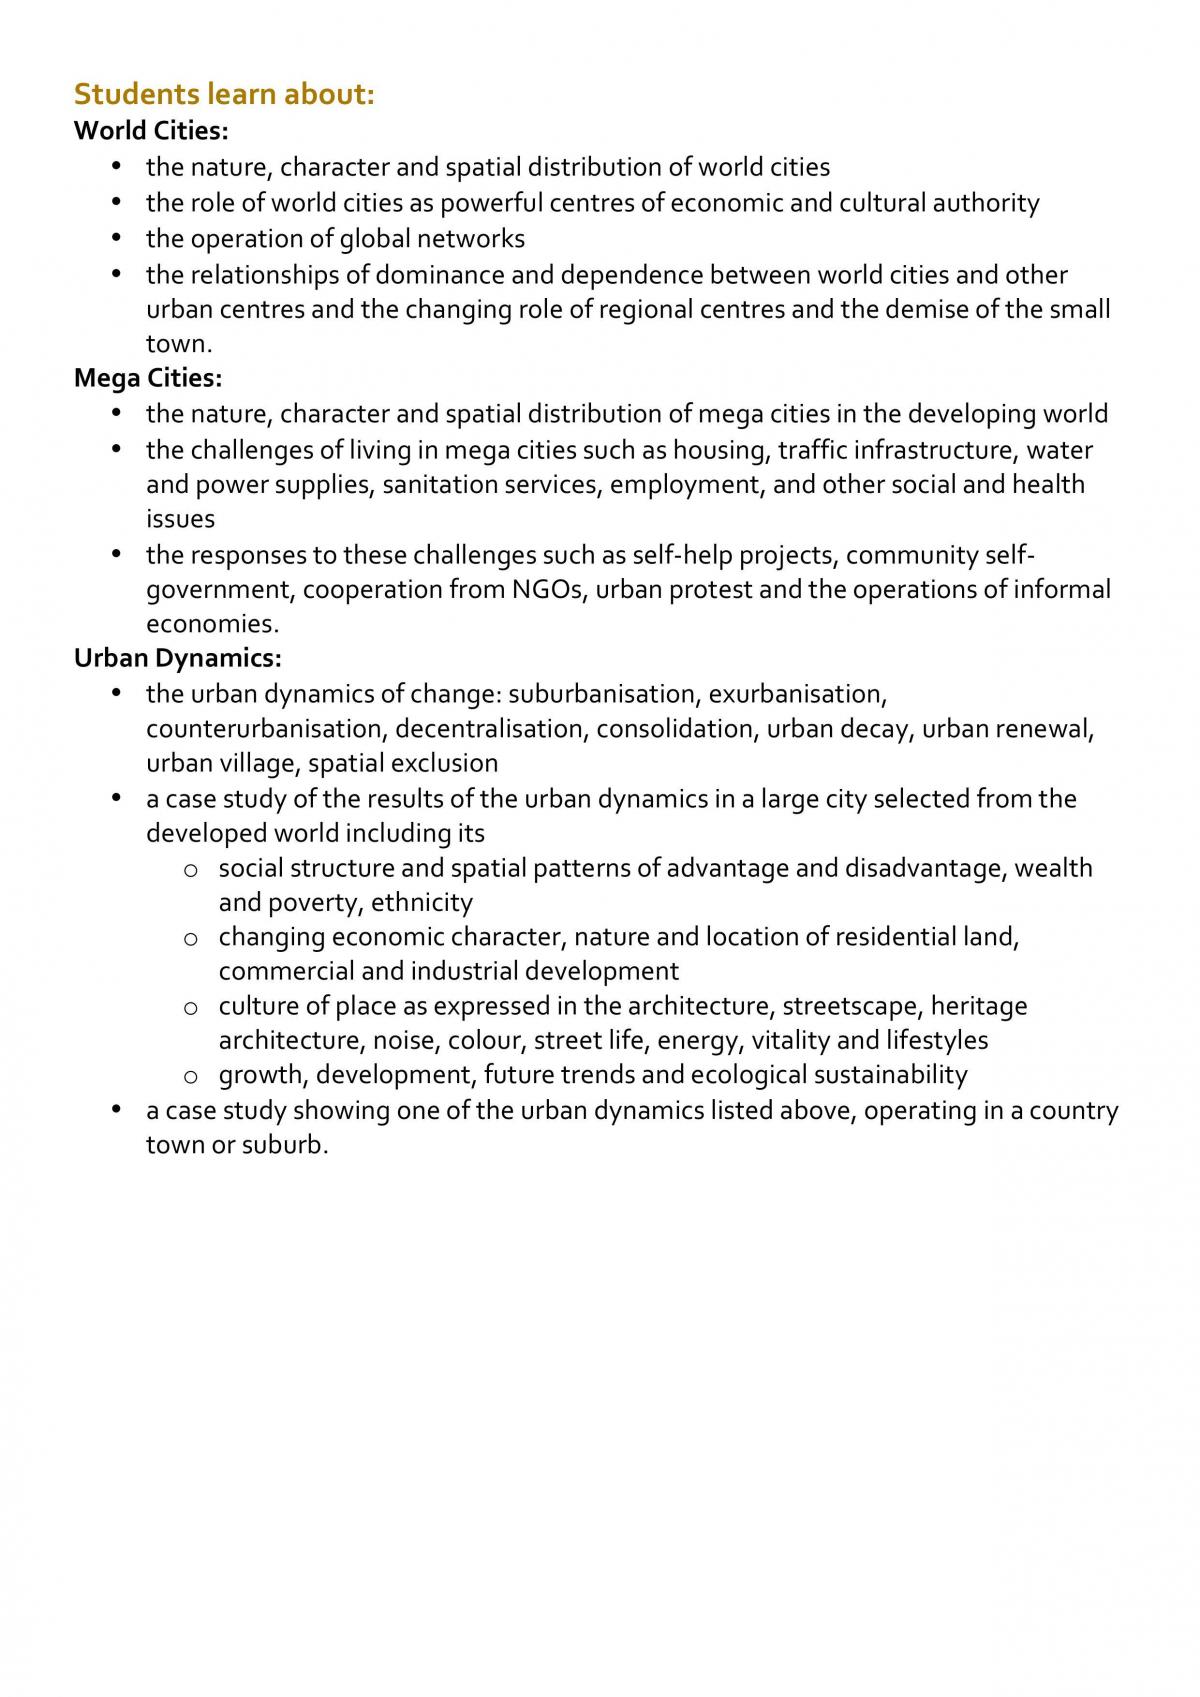 HSC Geography Urban Places (World Cities, Megacities and Urban Dynamics) - Page 1